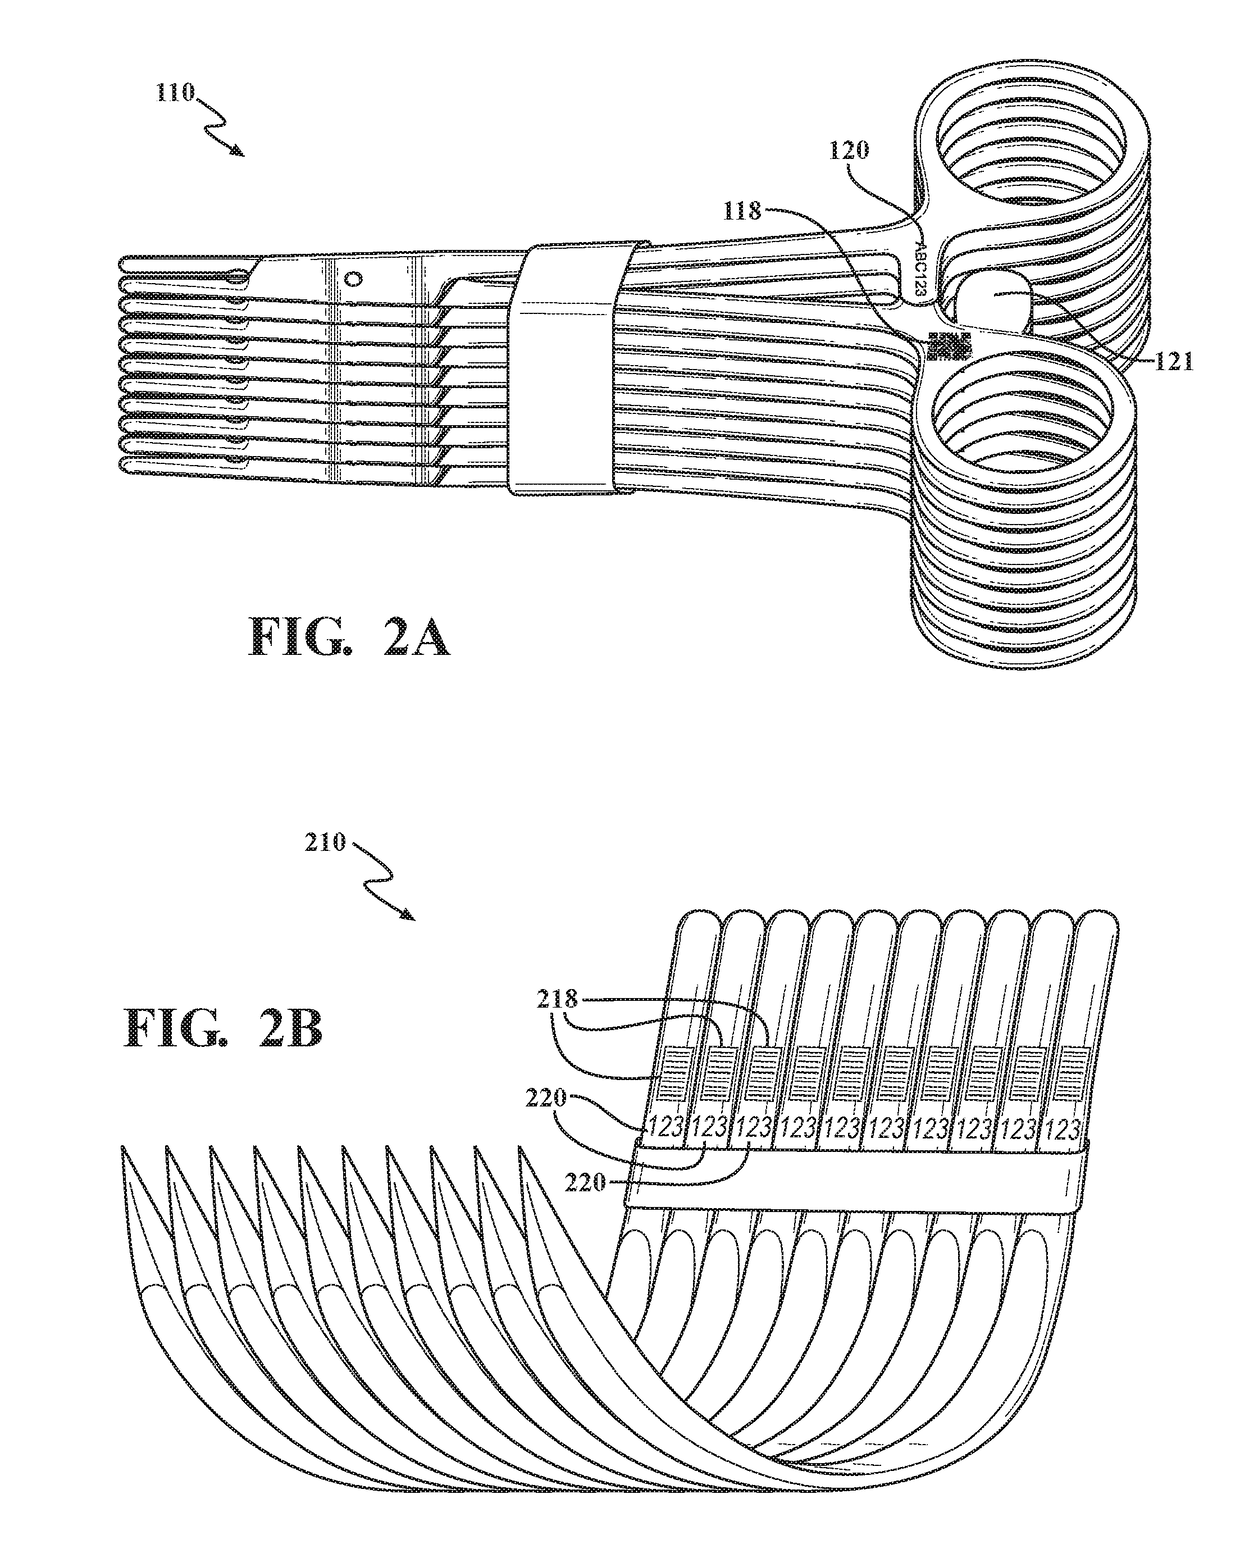 Surgical Article And Method For Managing Surgical Articles During A Surgical Procedure